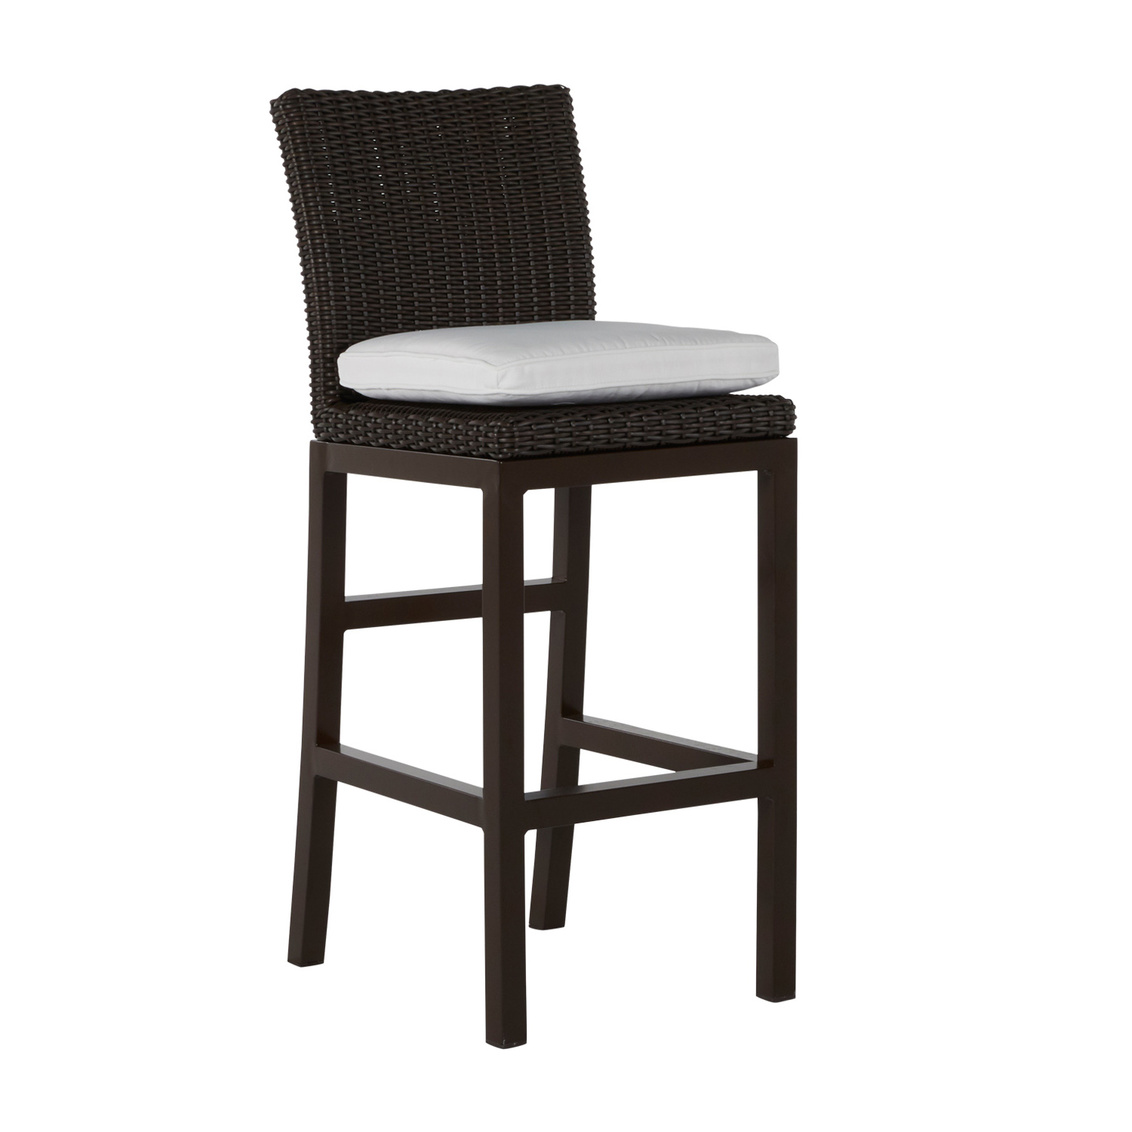 30.5 inch rustic bar stool in black walnut – frame only product image